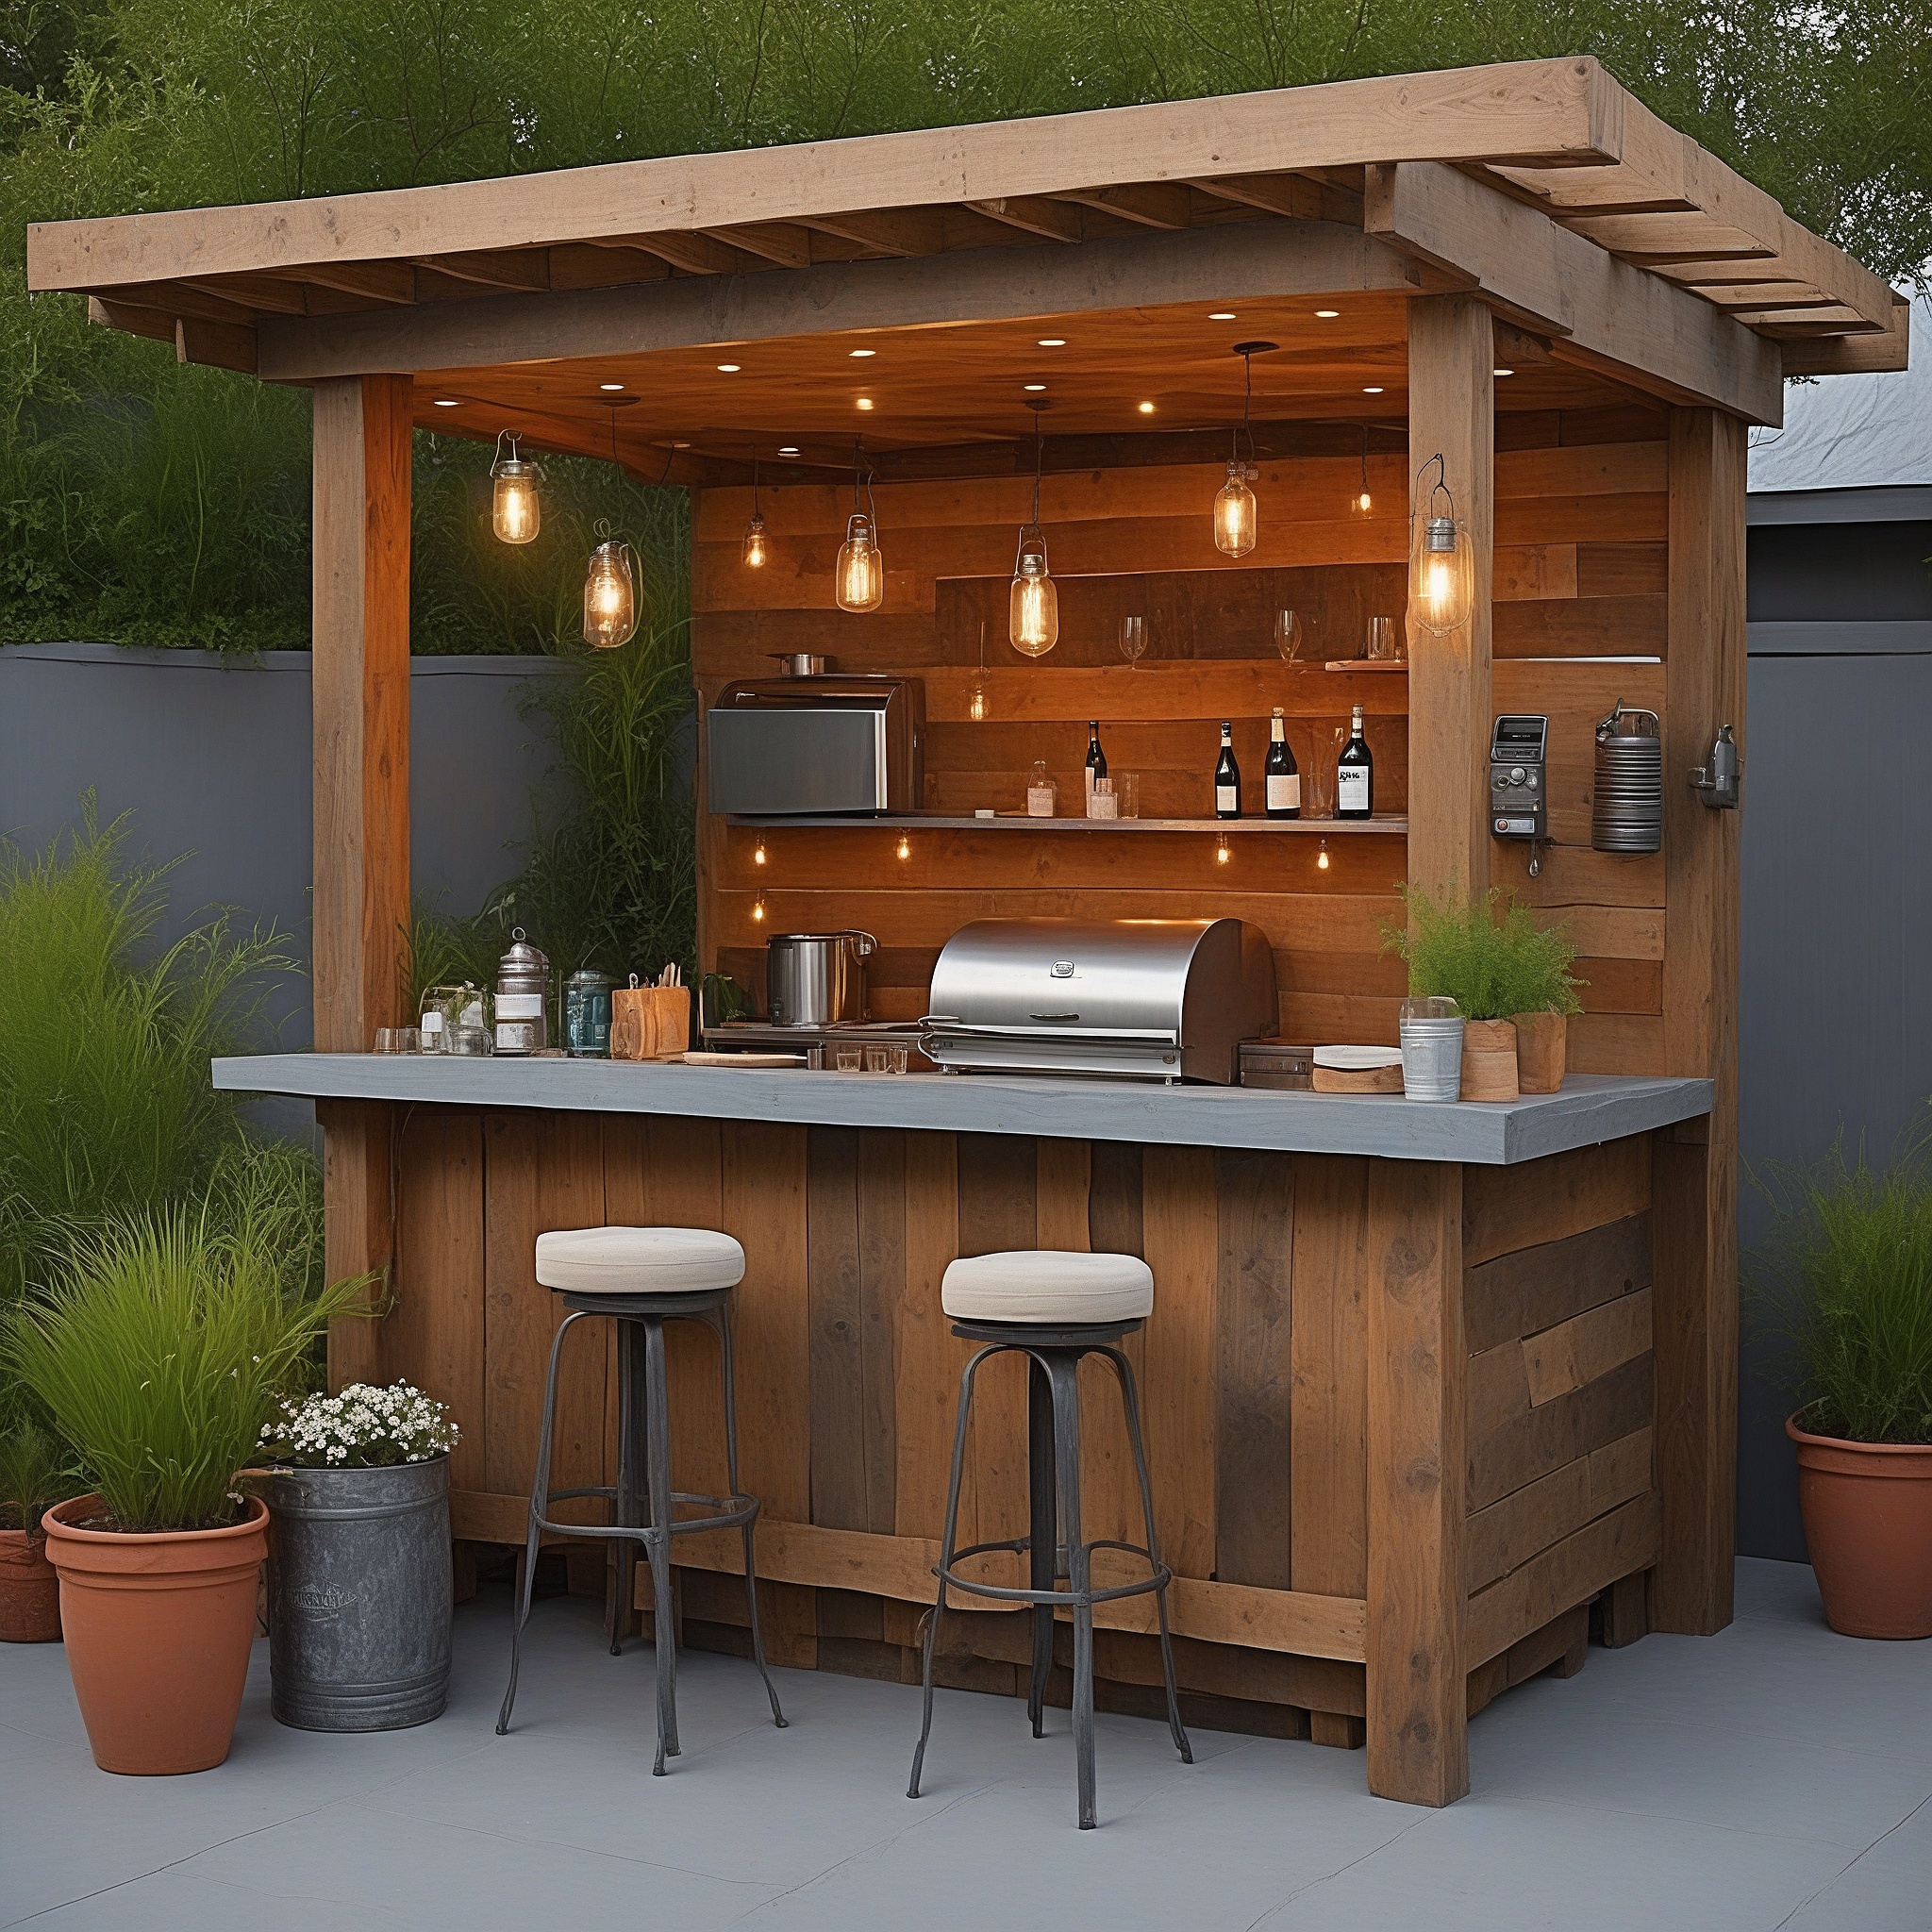 Wooden Pallet Bar and Grill Setup